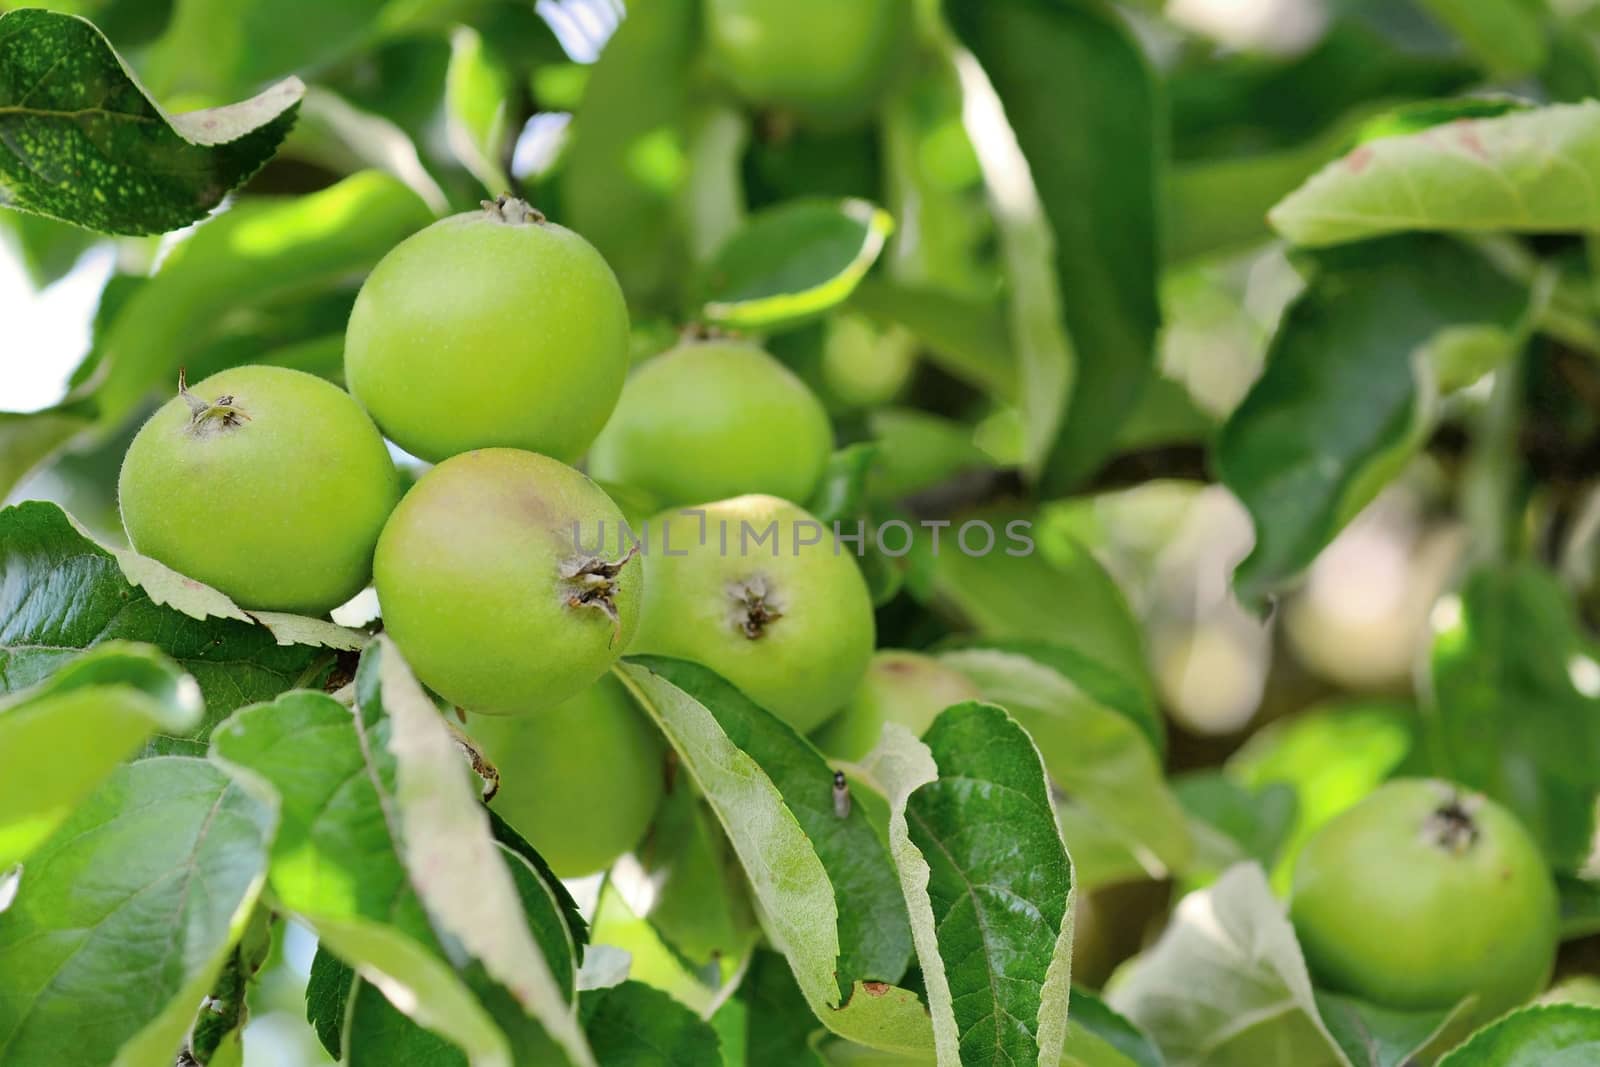 Apple tree branch with small green aples bunch.